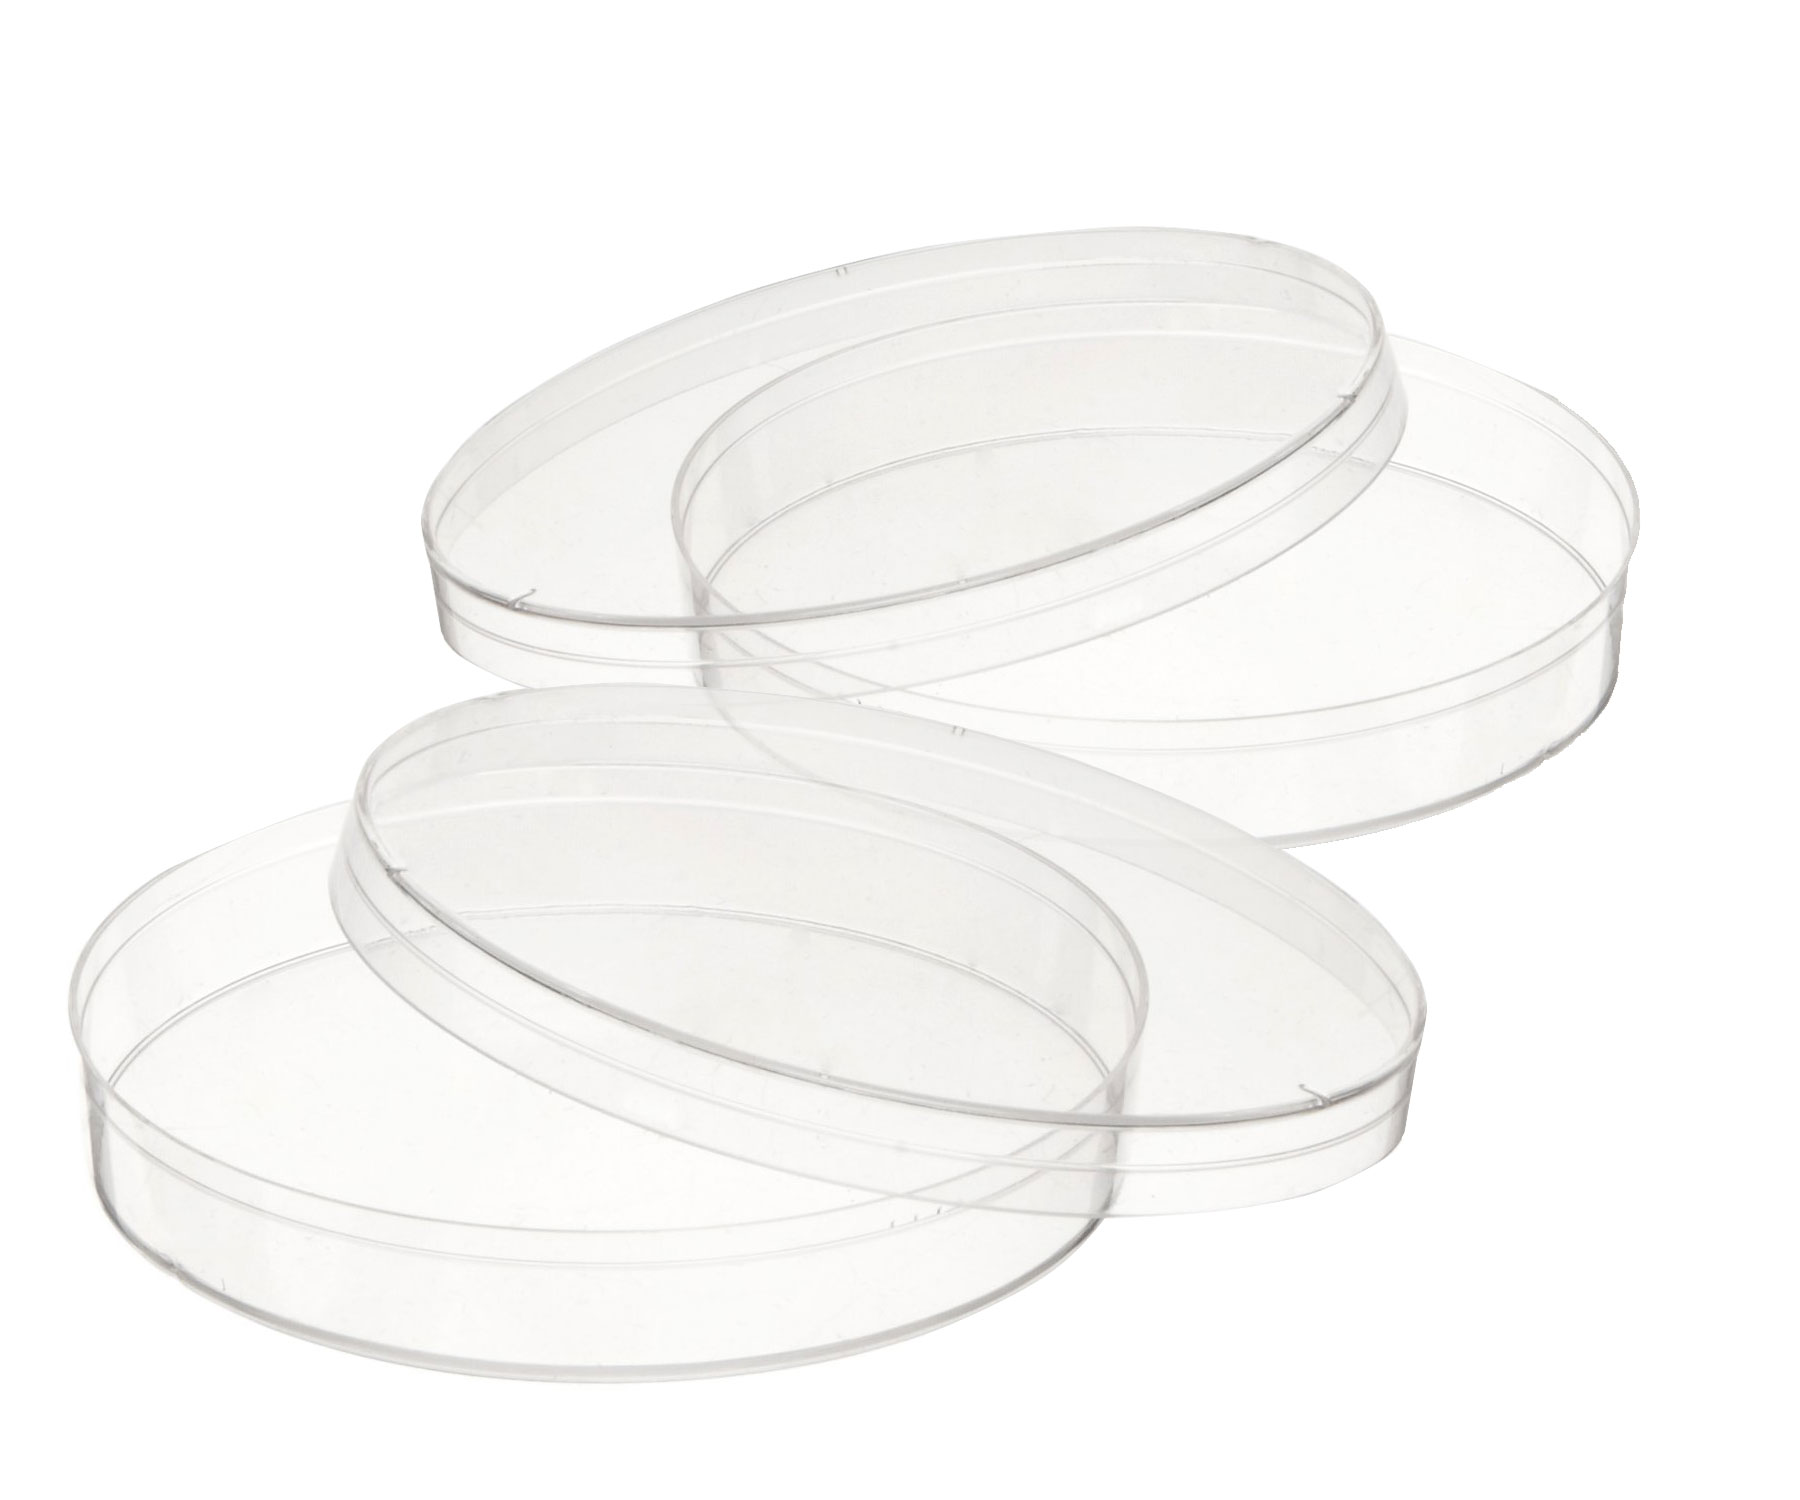 PETRI DISH 60 X 15MM STACKABLE STERILE SLEEVE/25 - Click Image to Close